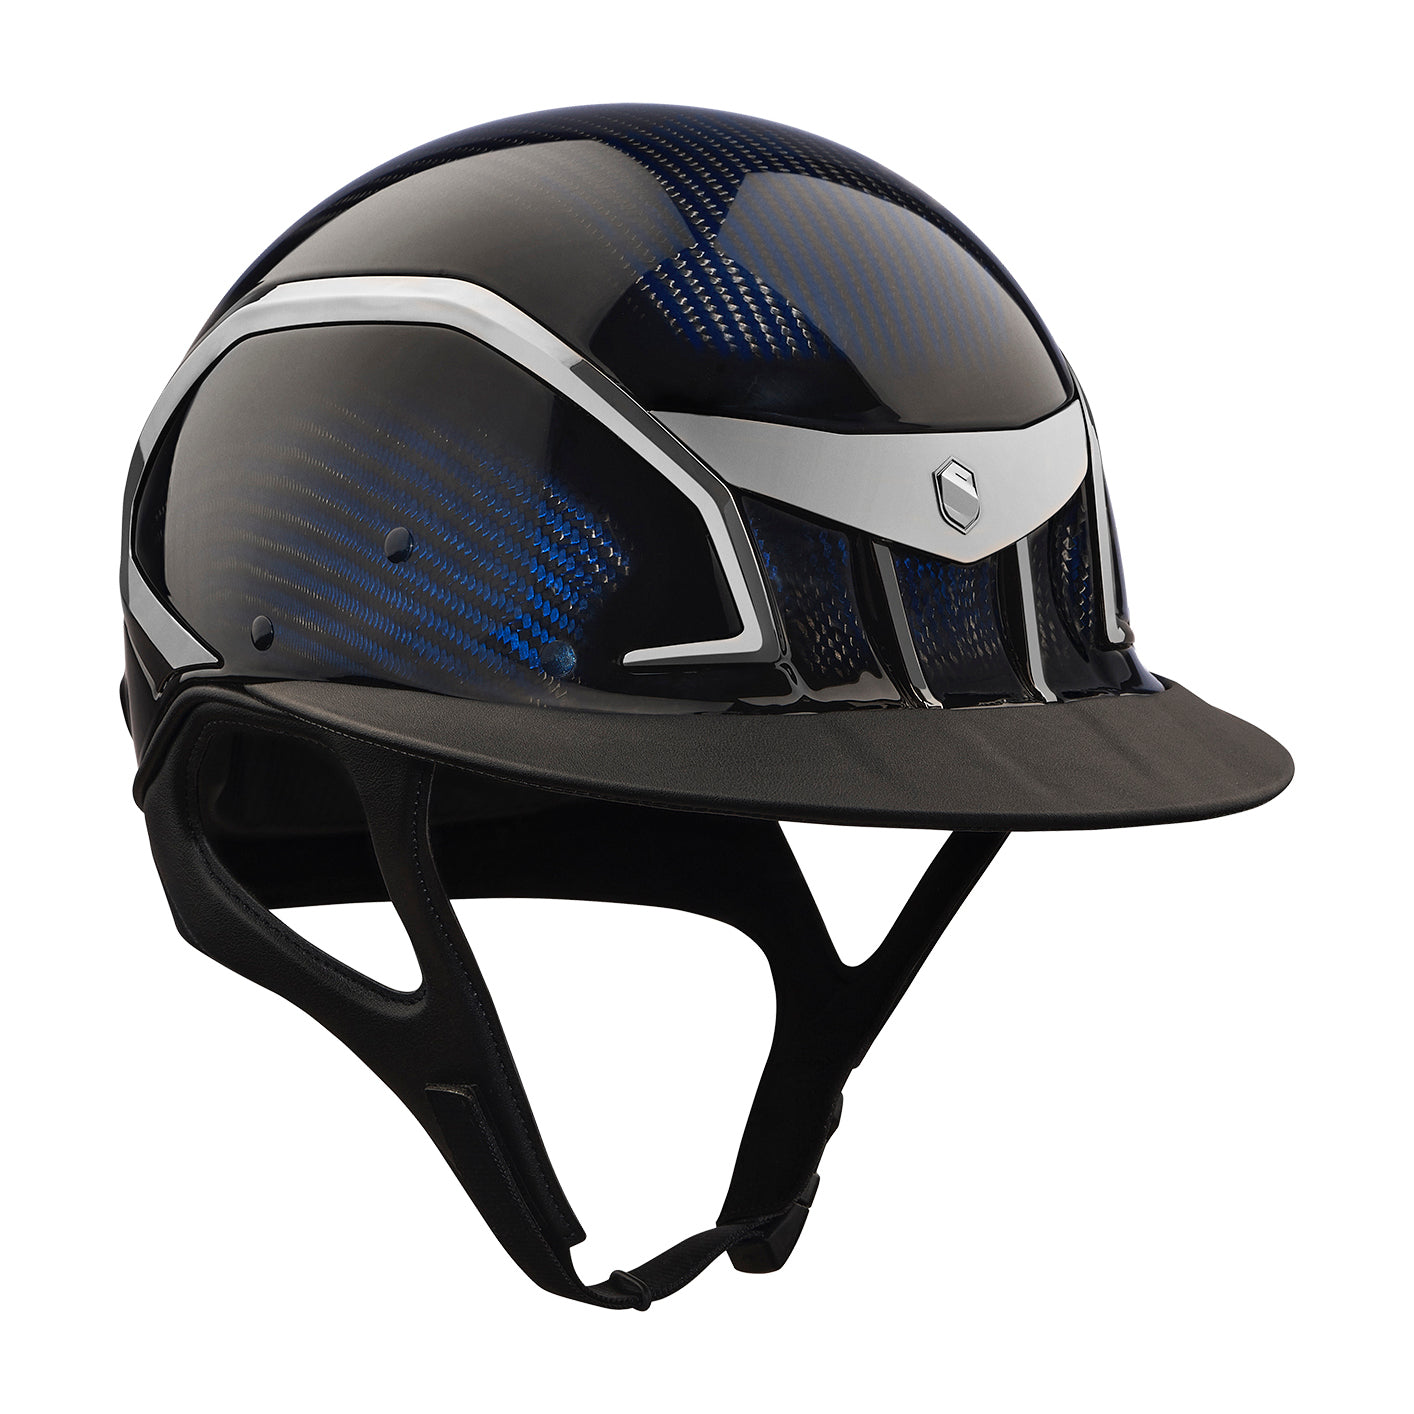 The Samshield XJ miss riding hat is made with carbon fibre and finished with a wide visor. The hat is navy gloss with chrome detailing.